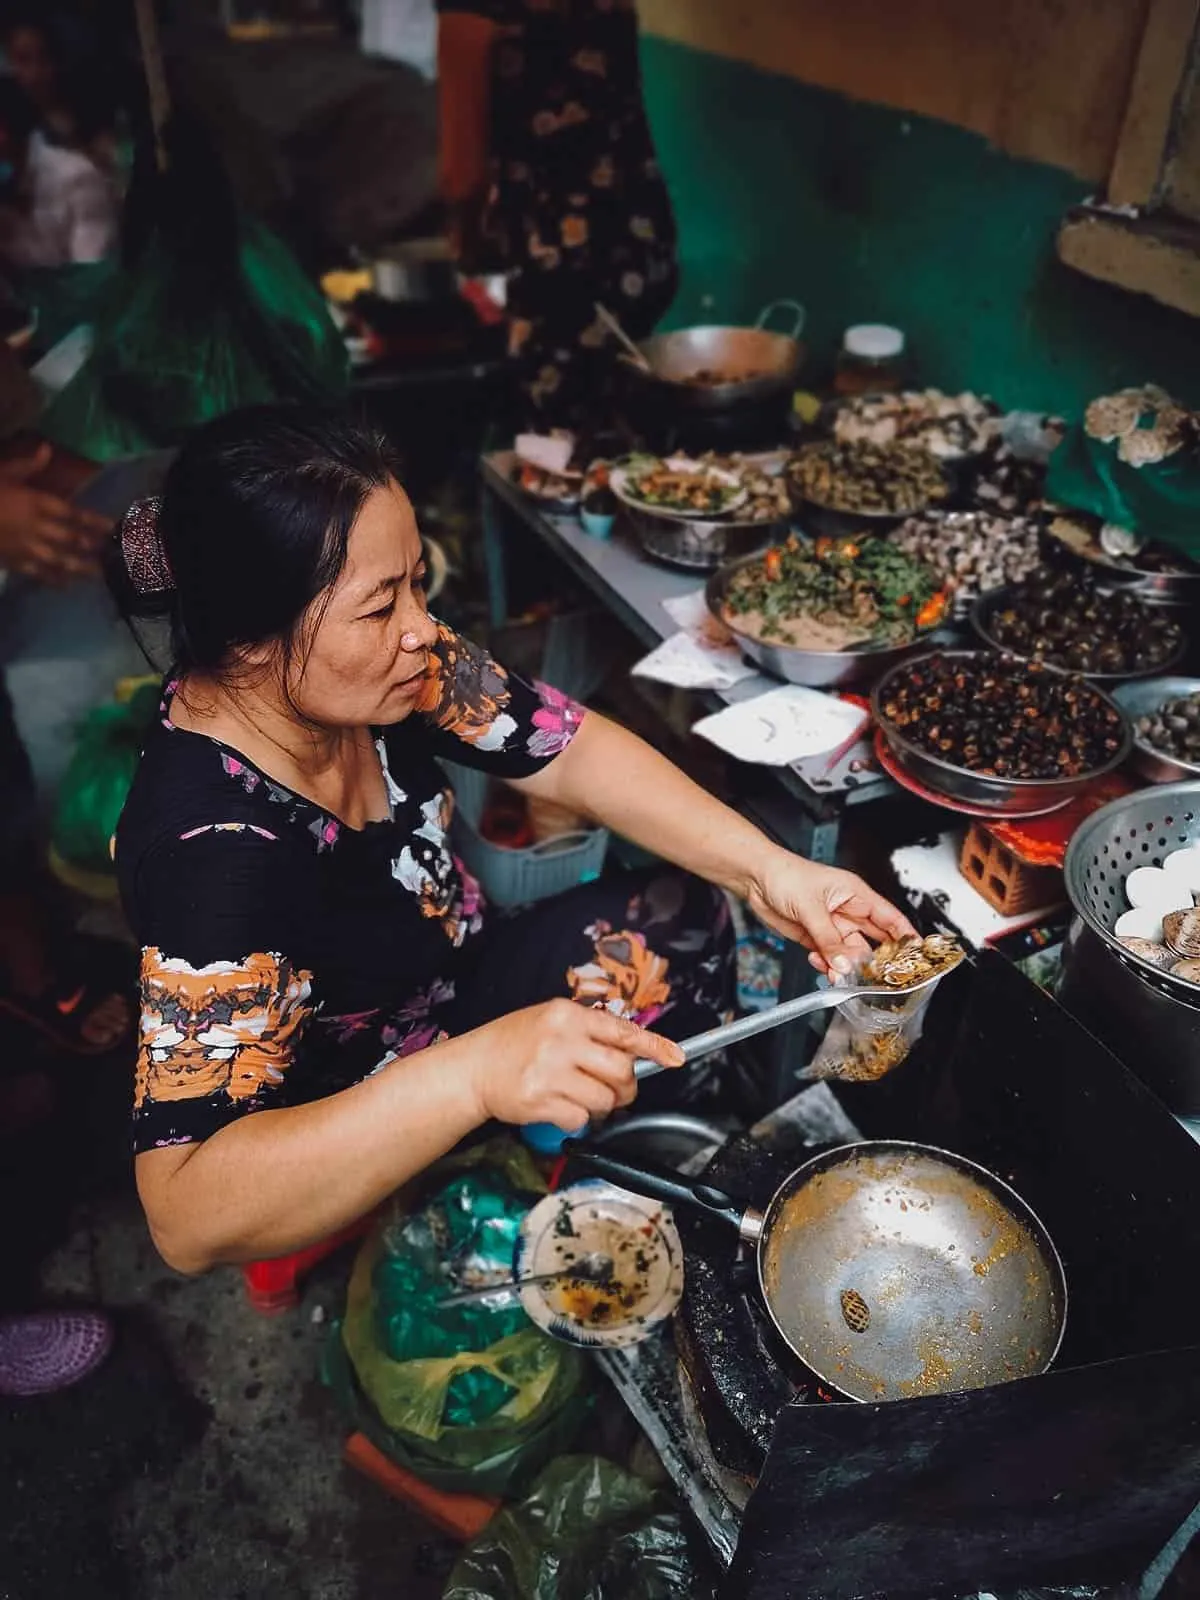 Mrs Truoc cooking snails in Ho Chi Minh City